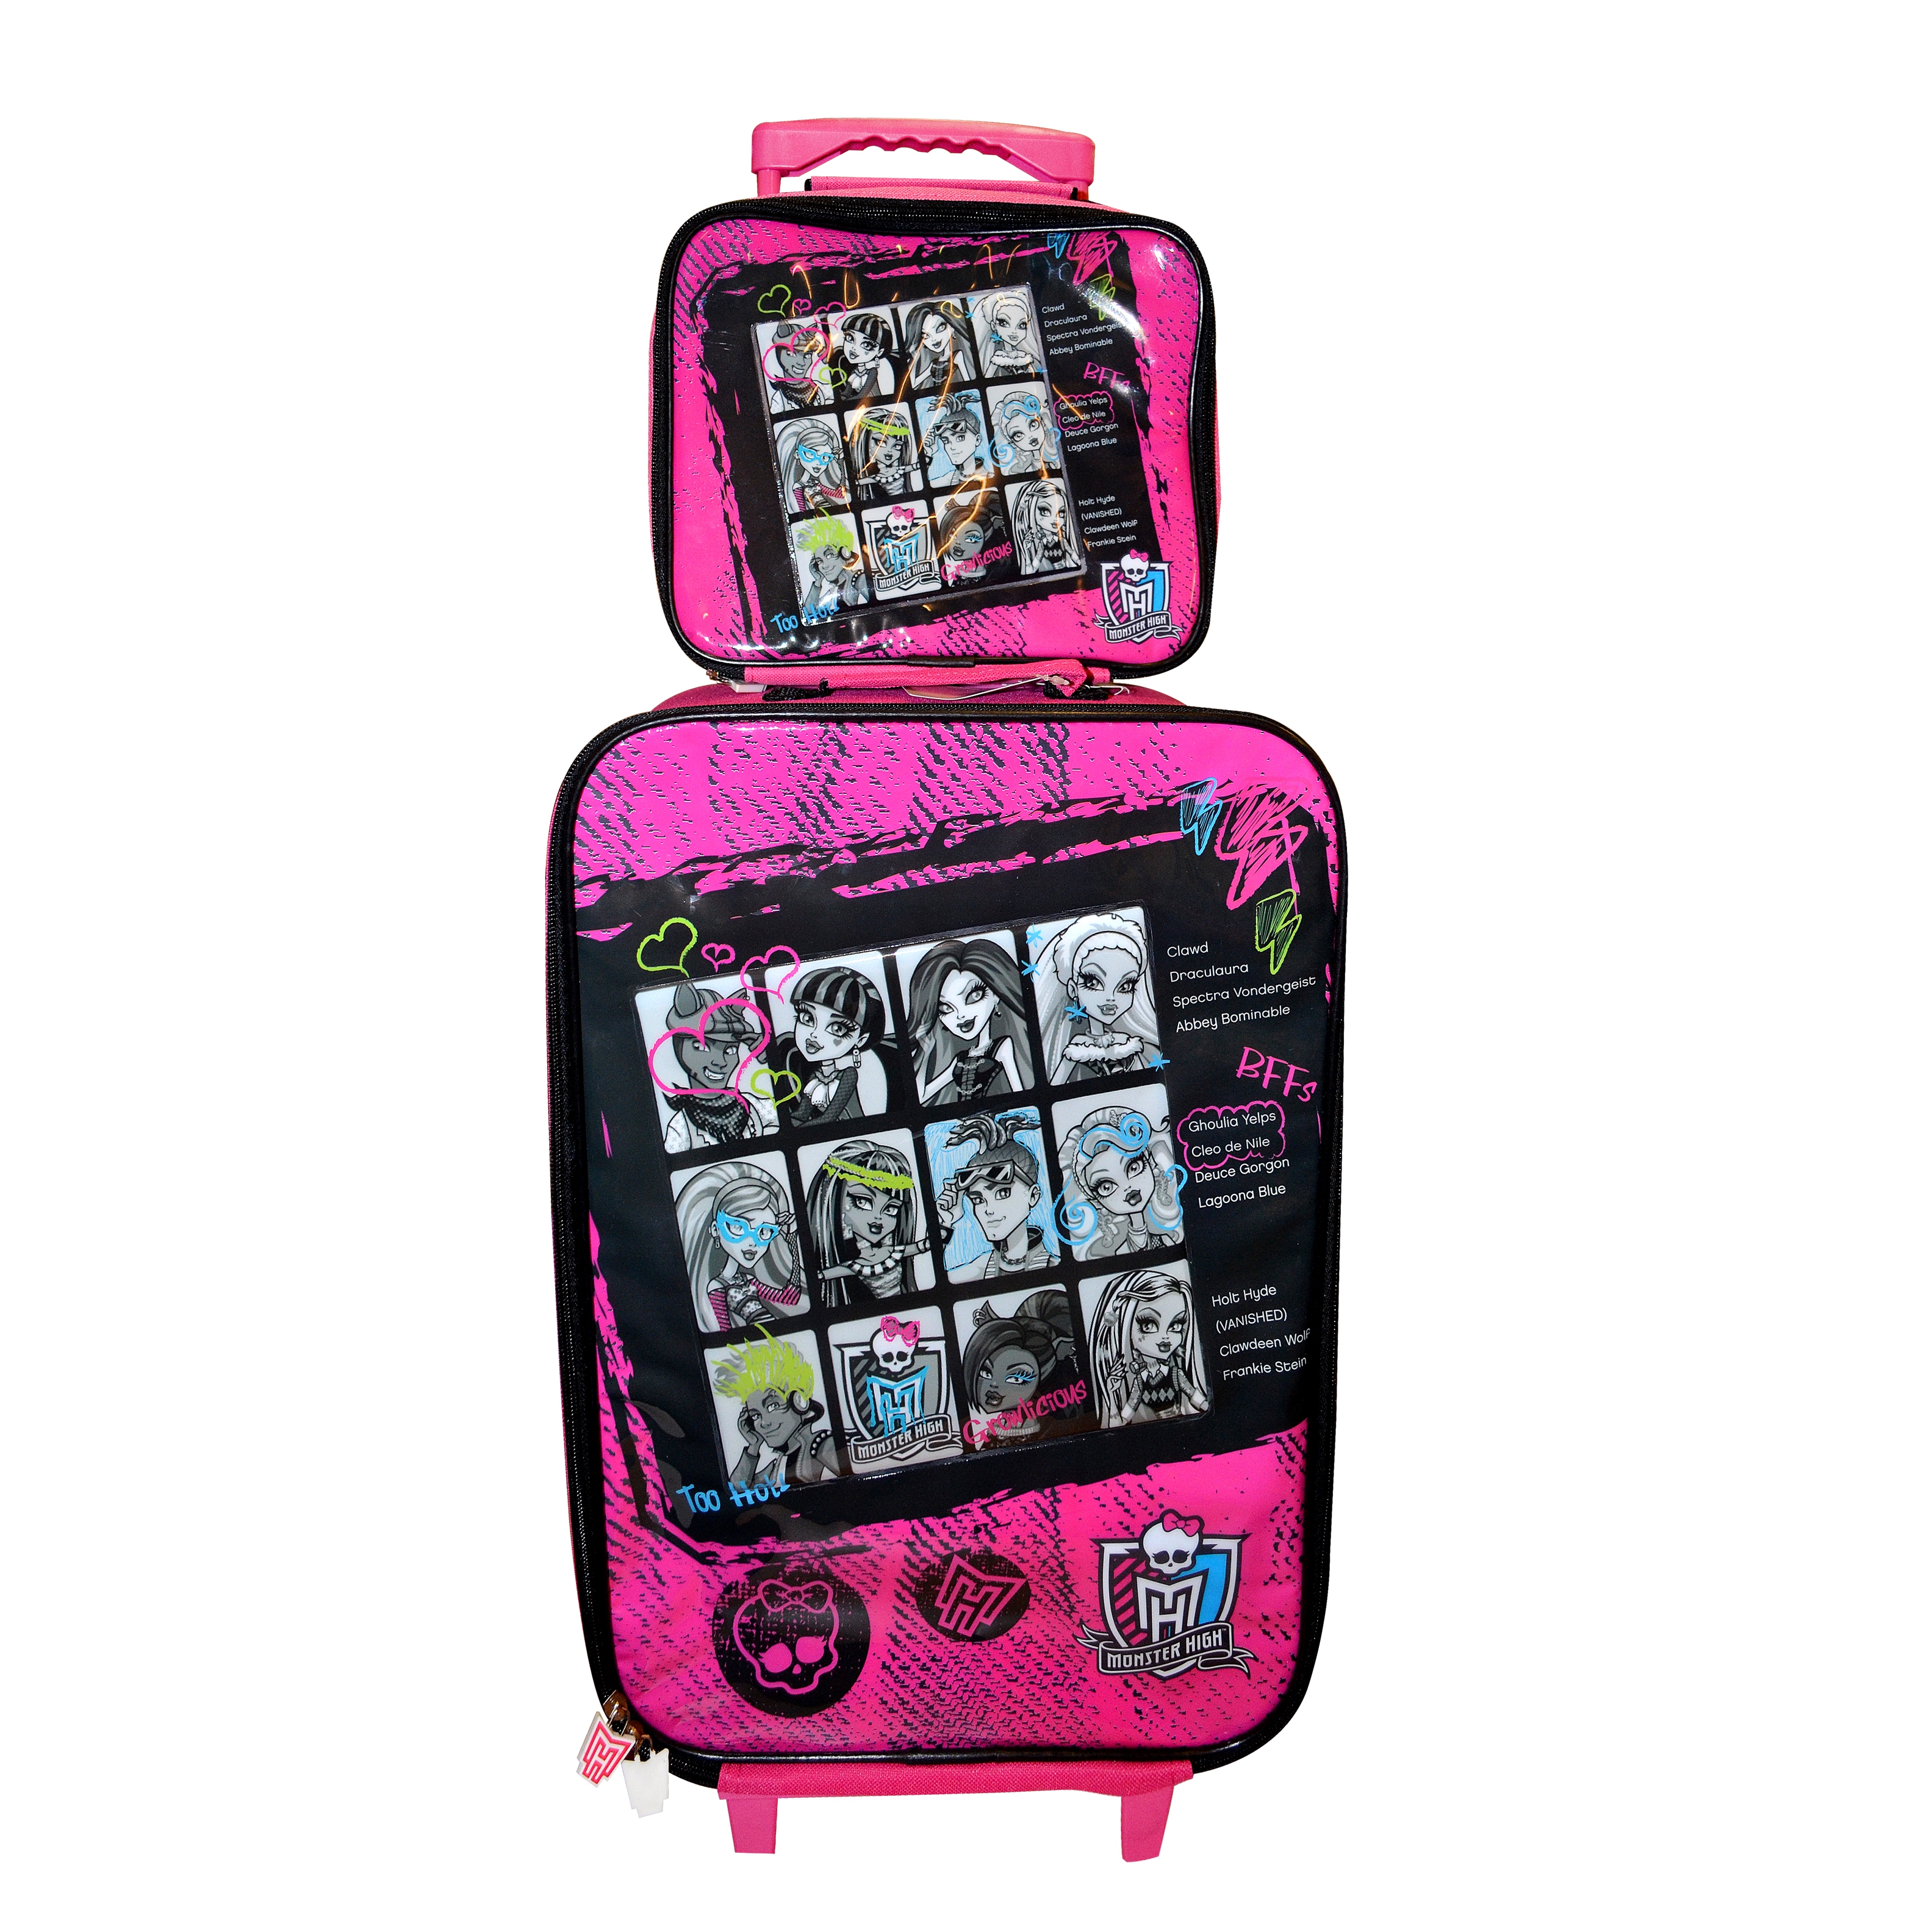 Monster High 'Friends' 2 Piece Suitcase with Lunch Bag Luggage Set